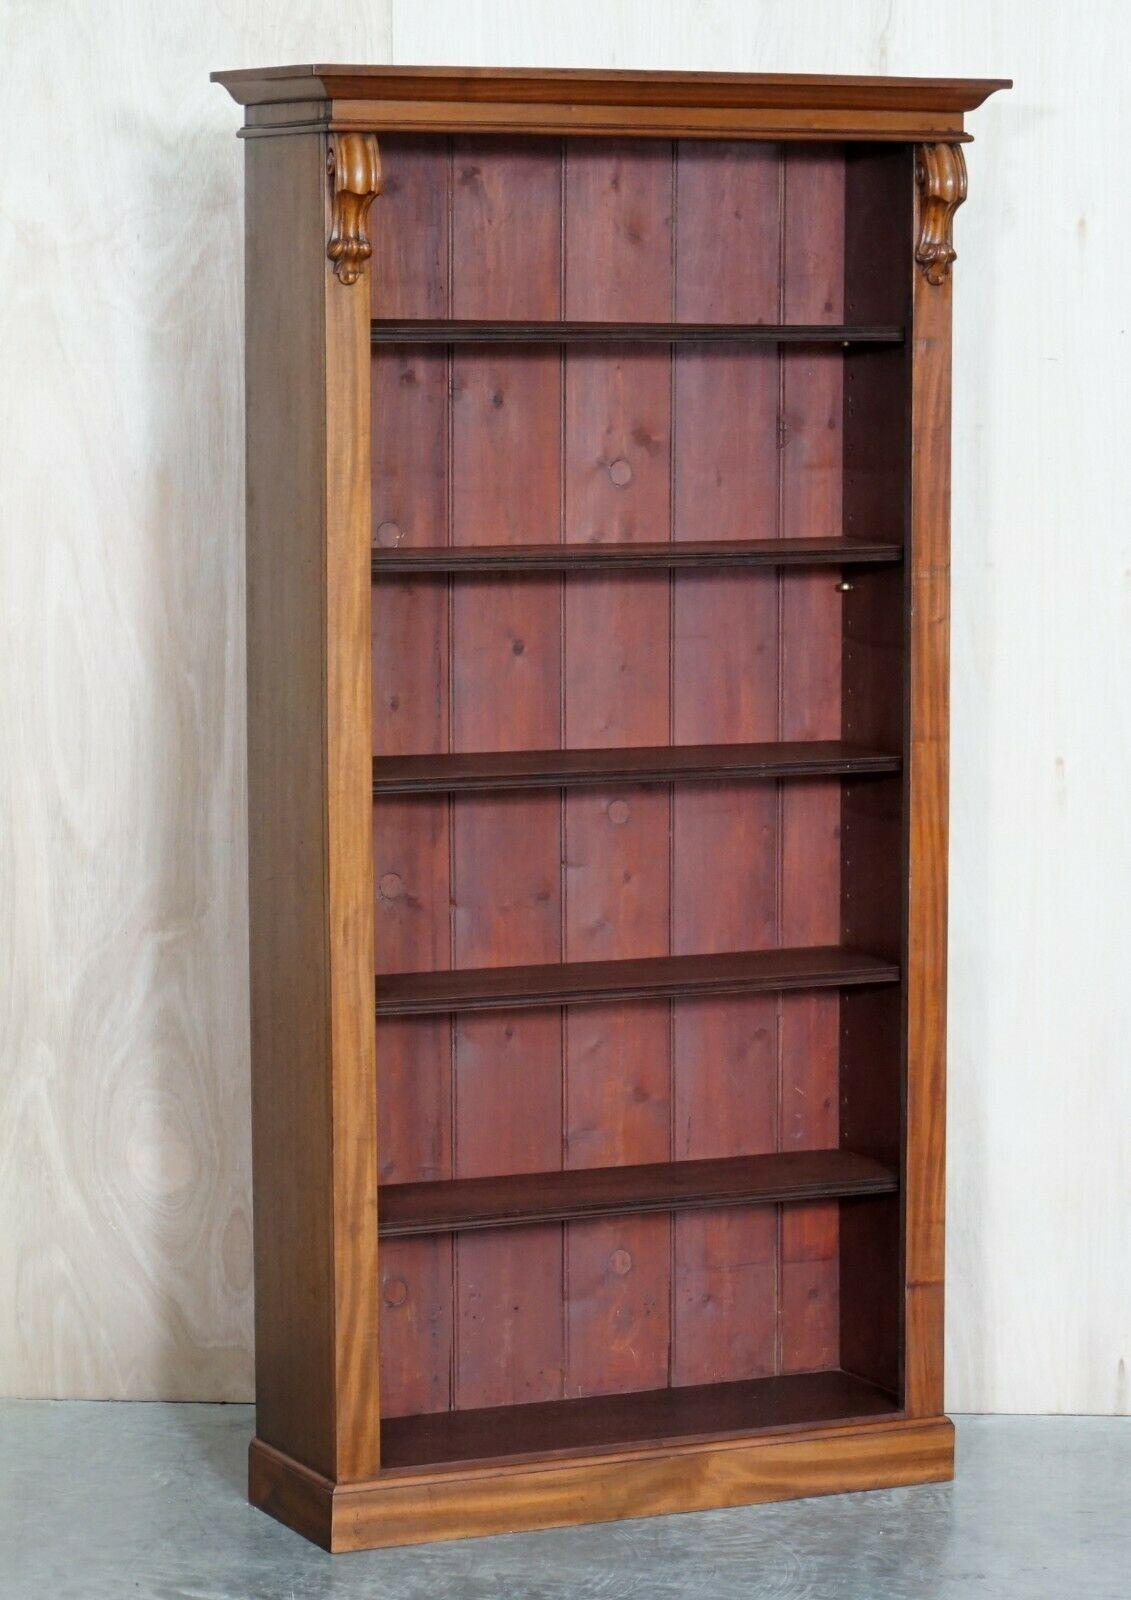 PAIR OF ViCTORIAN HARDWOOD TALL OPEN LIBRARY BOOKCASES HEIGHT ADJUSTABLE SHELVES 6